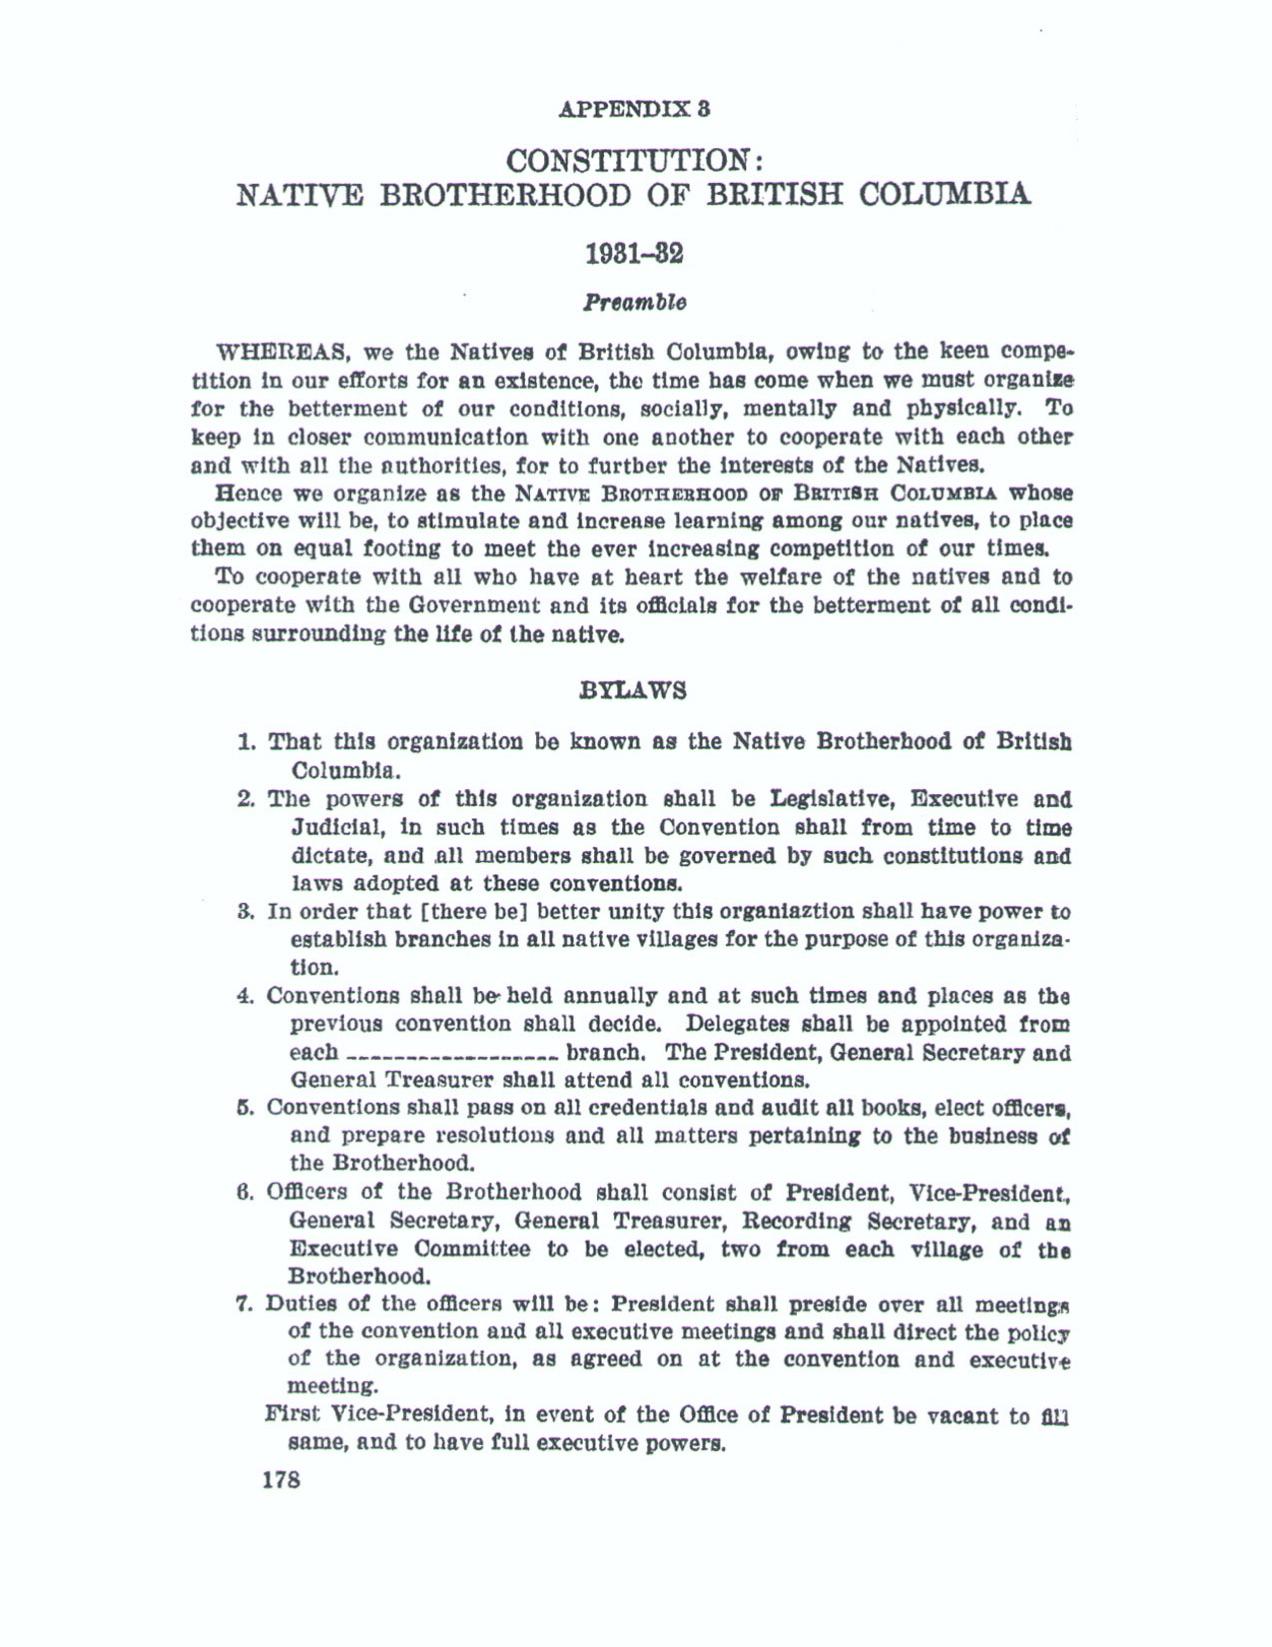 The first page of the constitution of the Native Brotherhood of BC